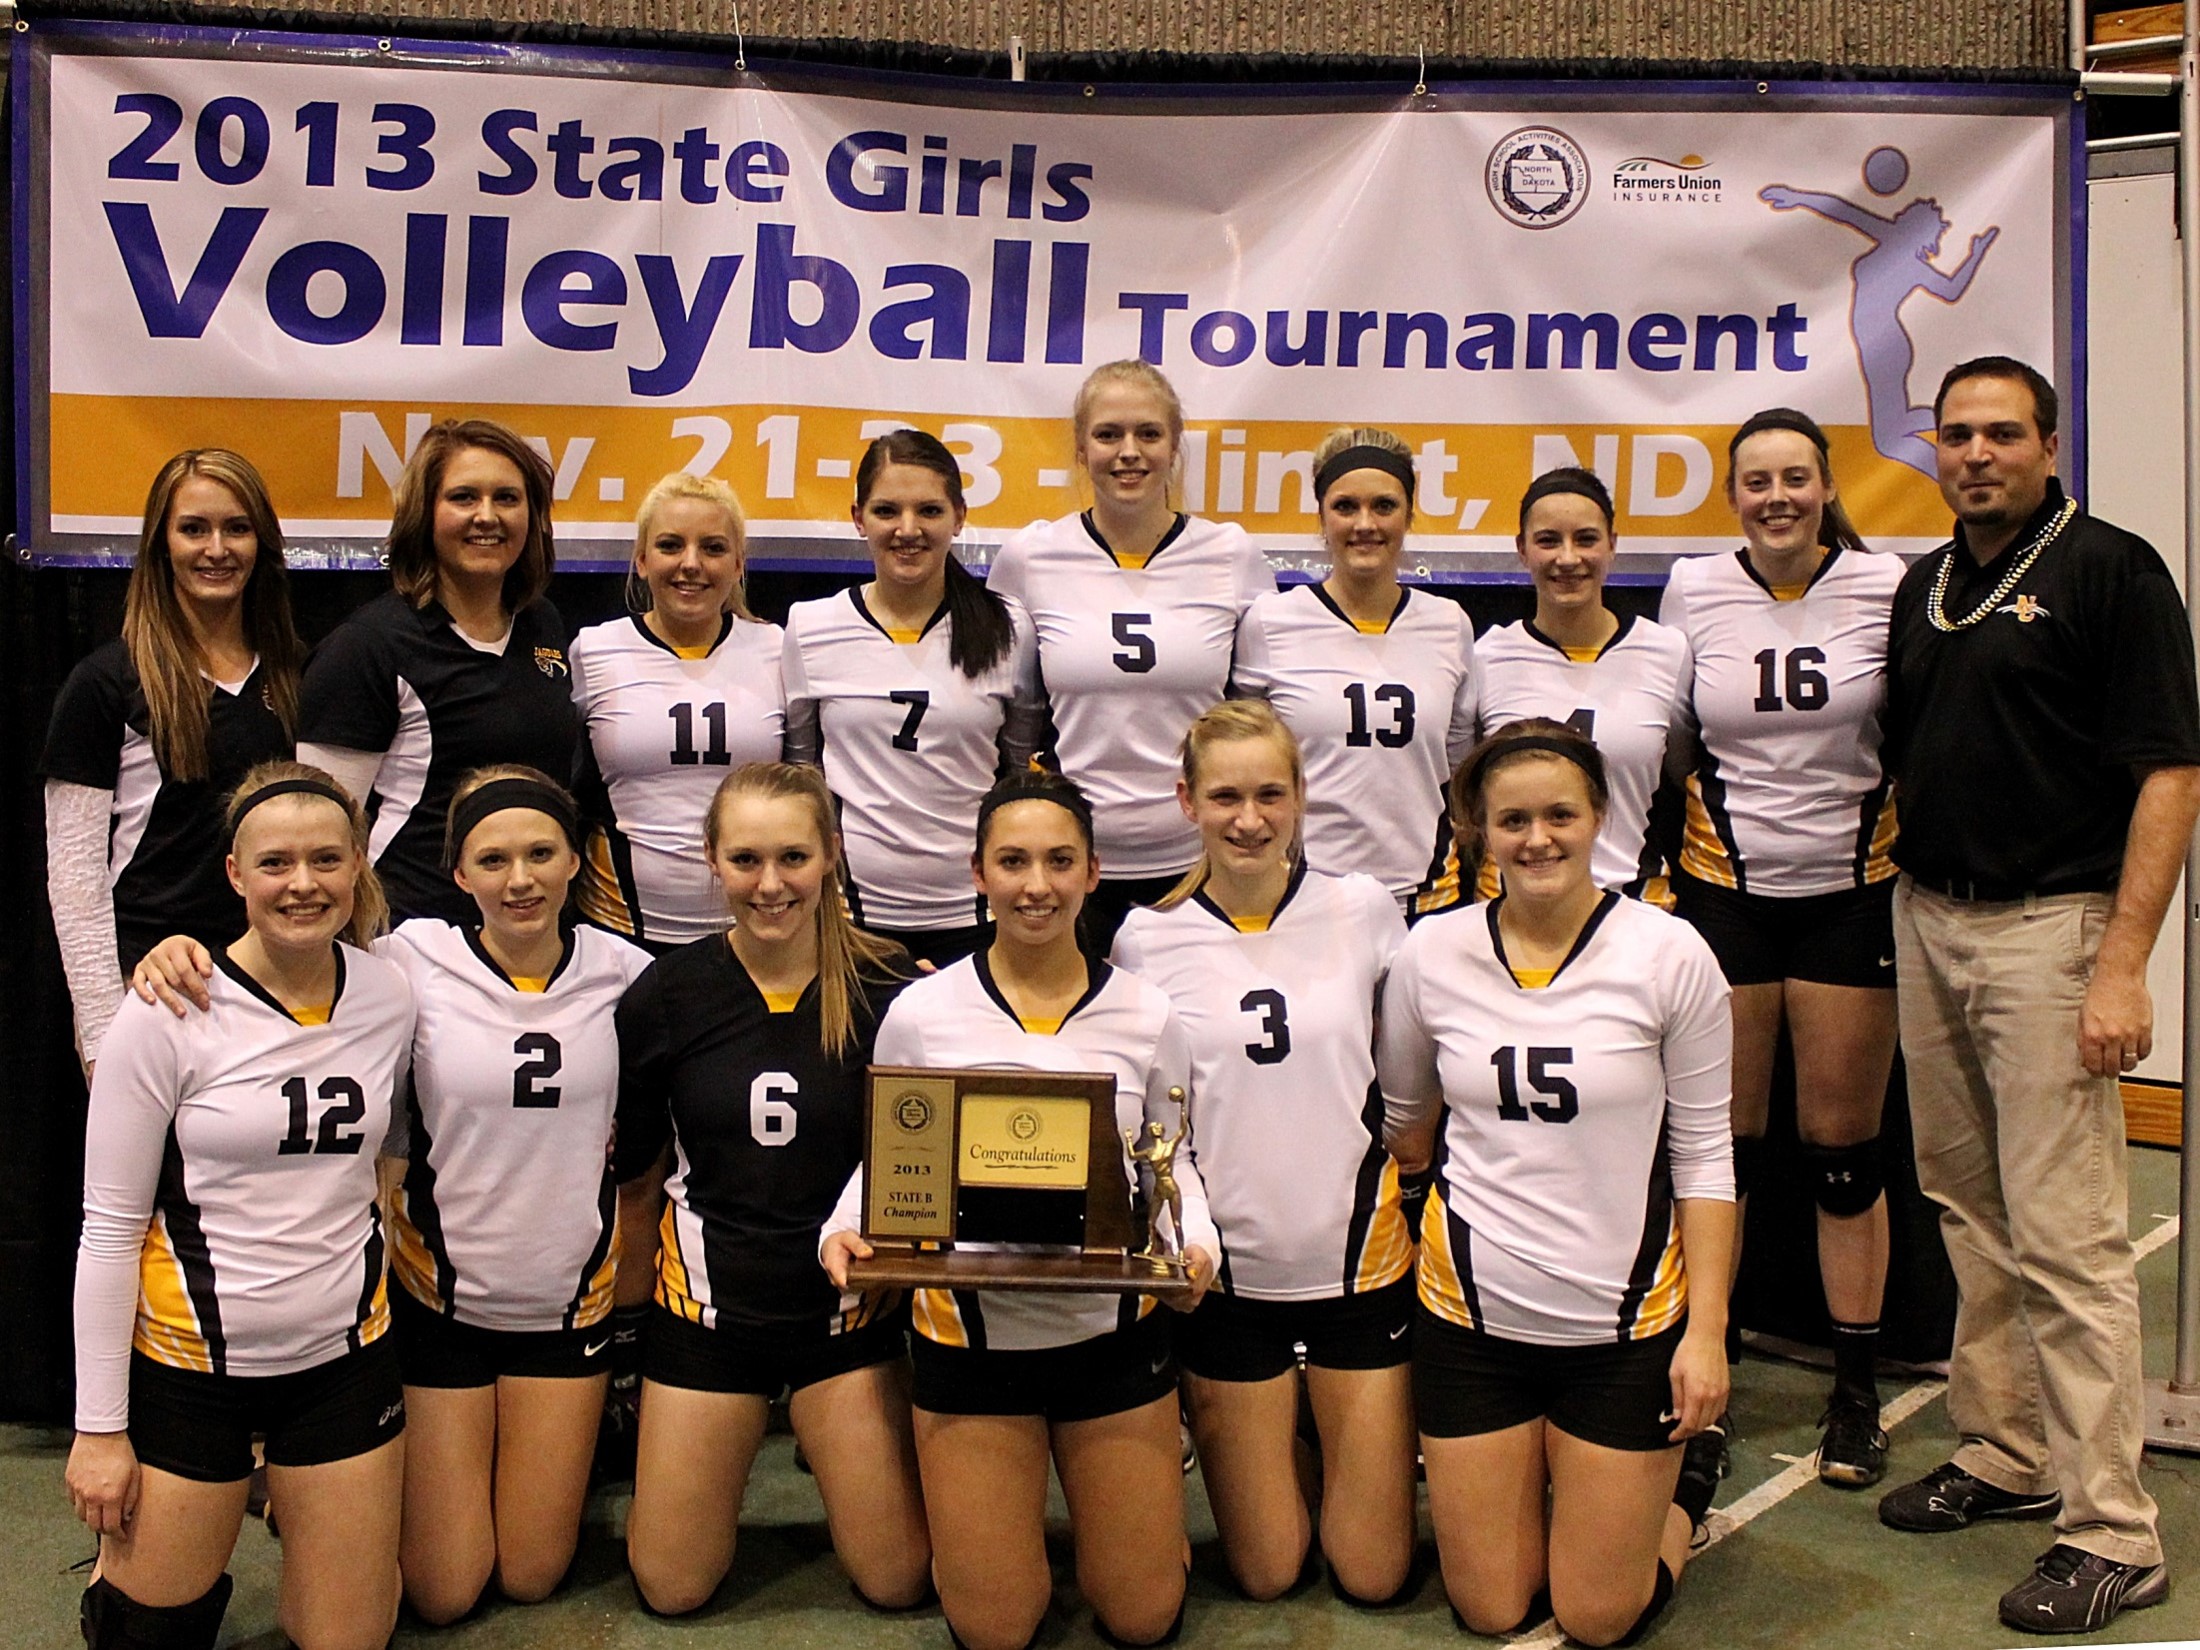 2013 Volleyball State Champions - Distinguished Team